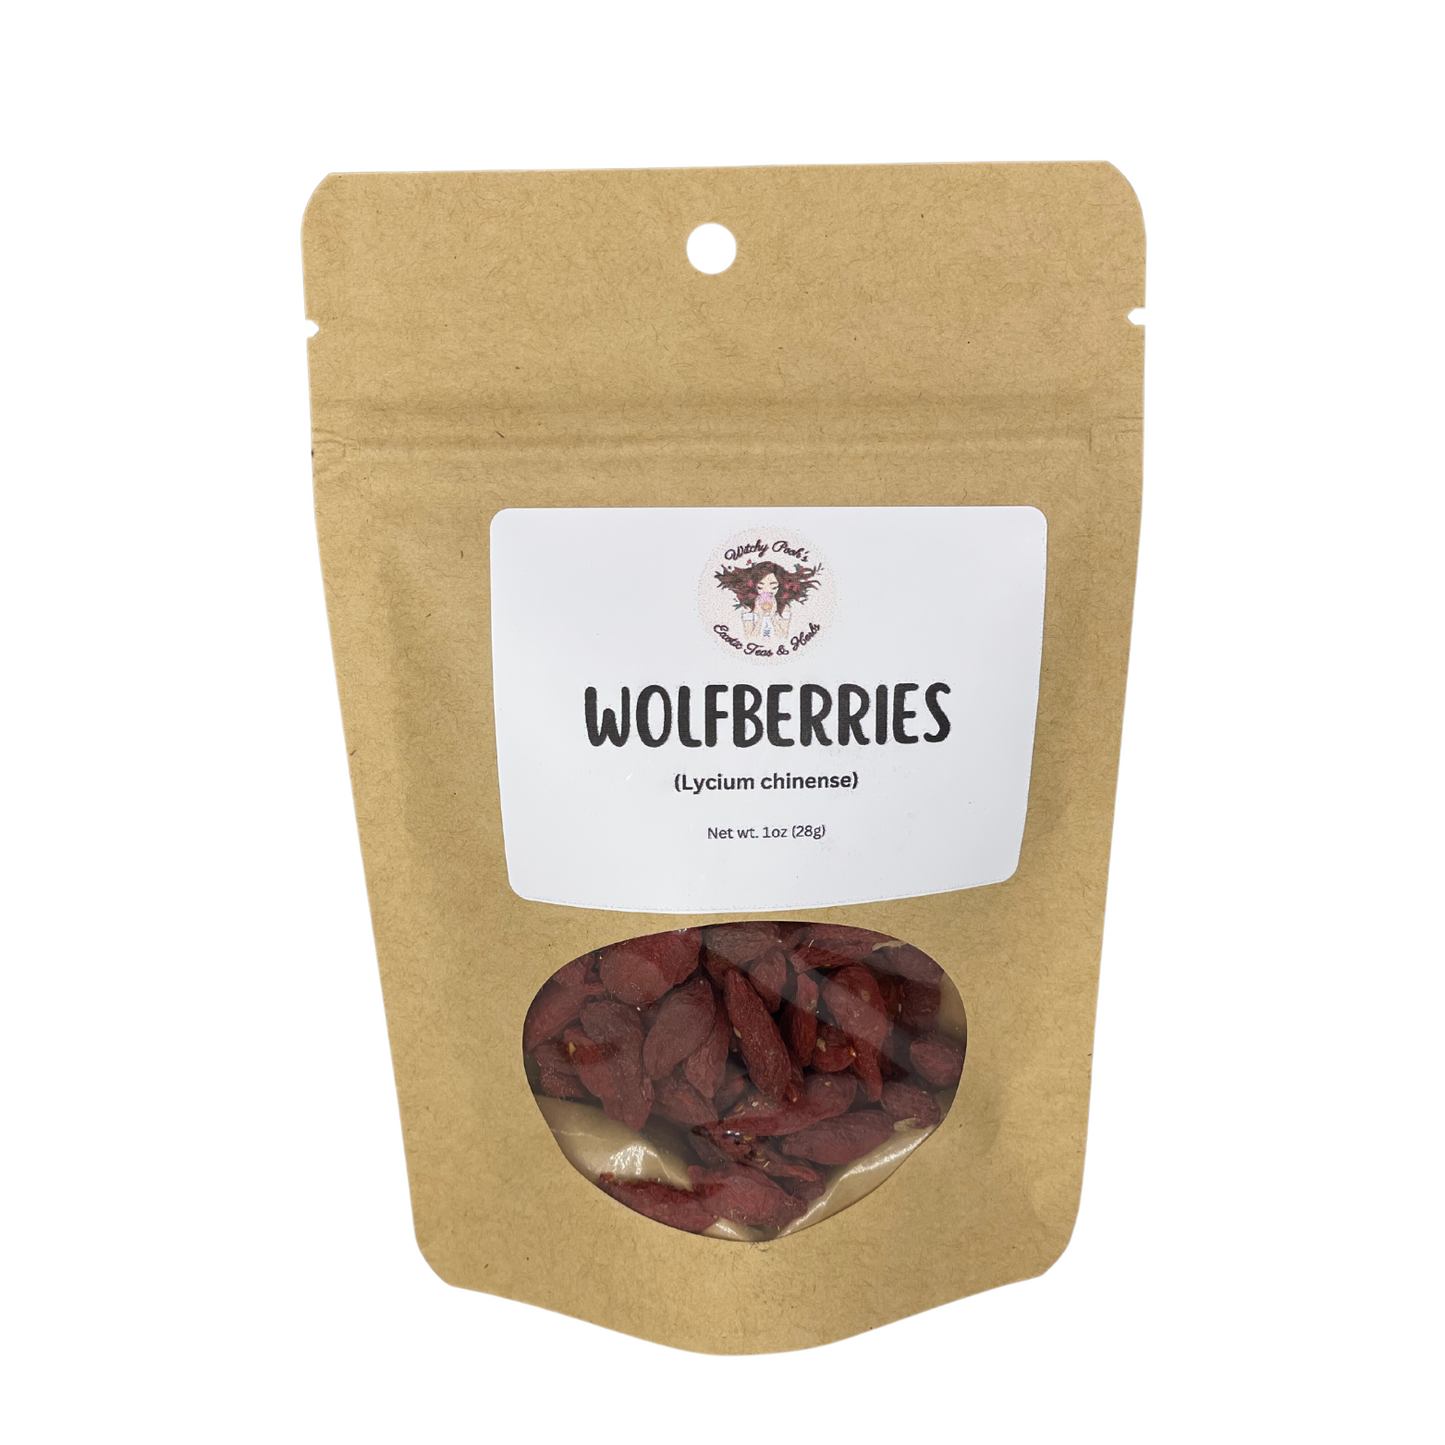 Witchy Pooh's Wolfberries, Goji Berries, Whole Soft and Chewy Berry Snacks, Trail Mix